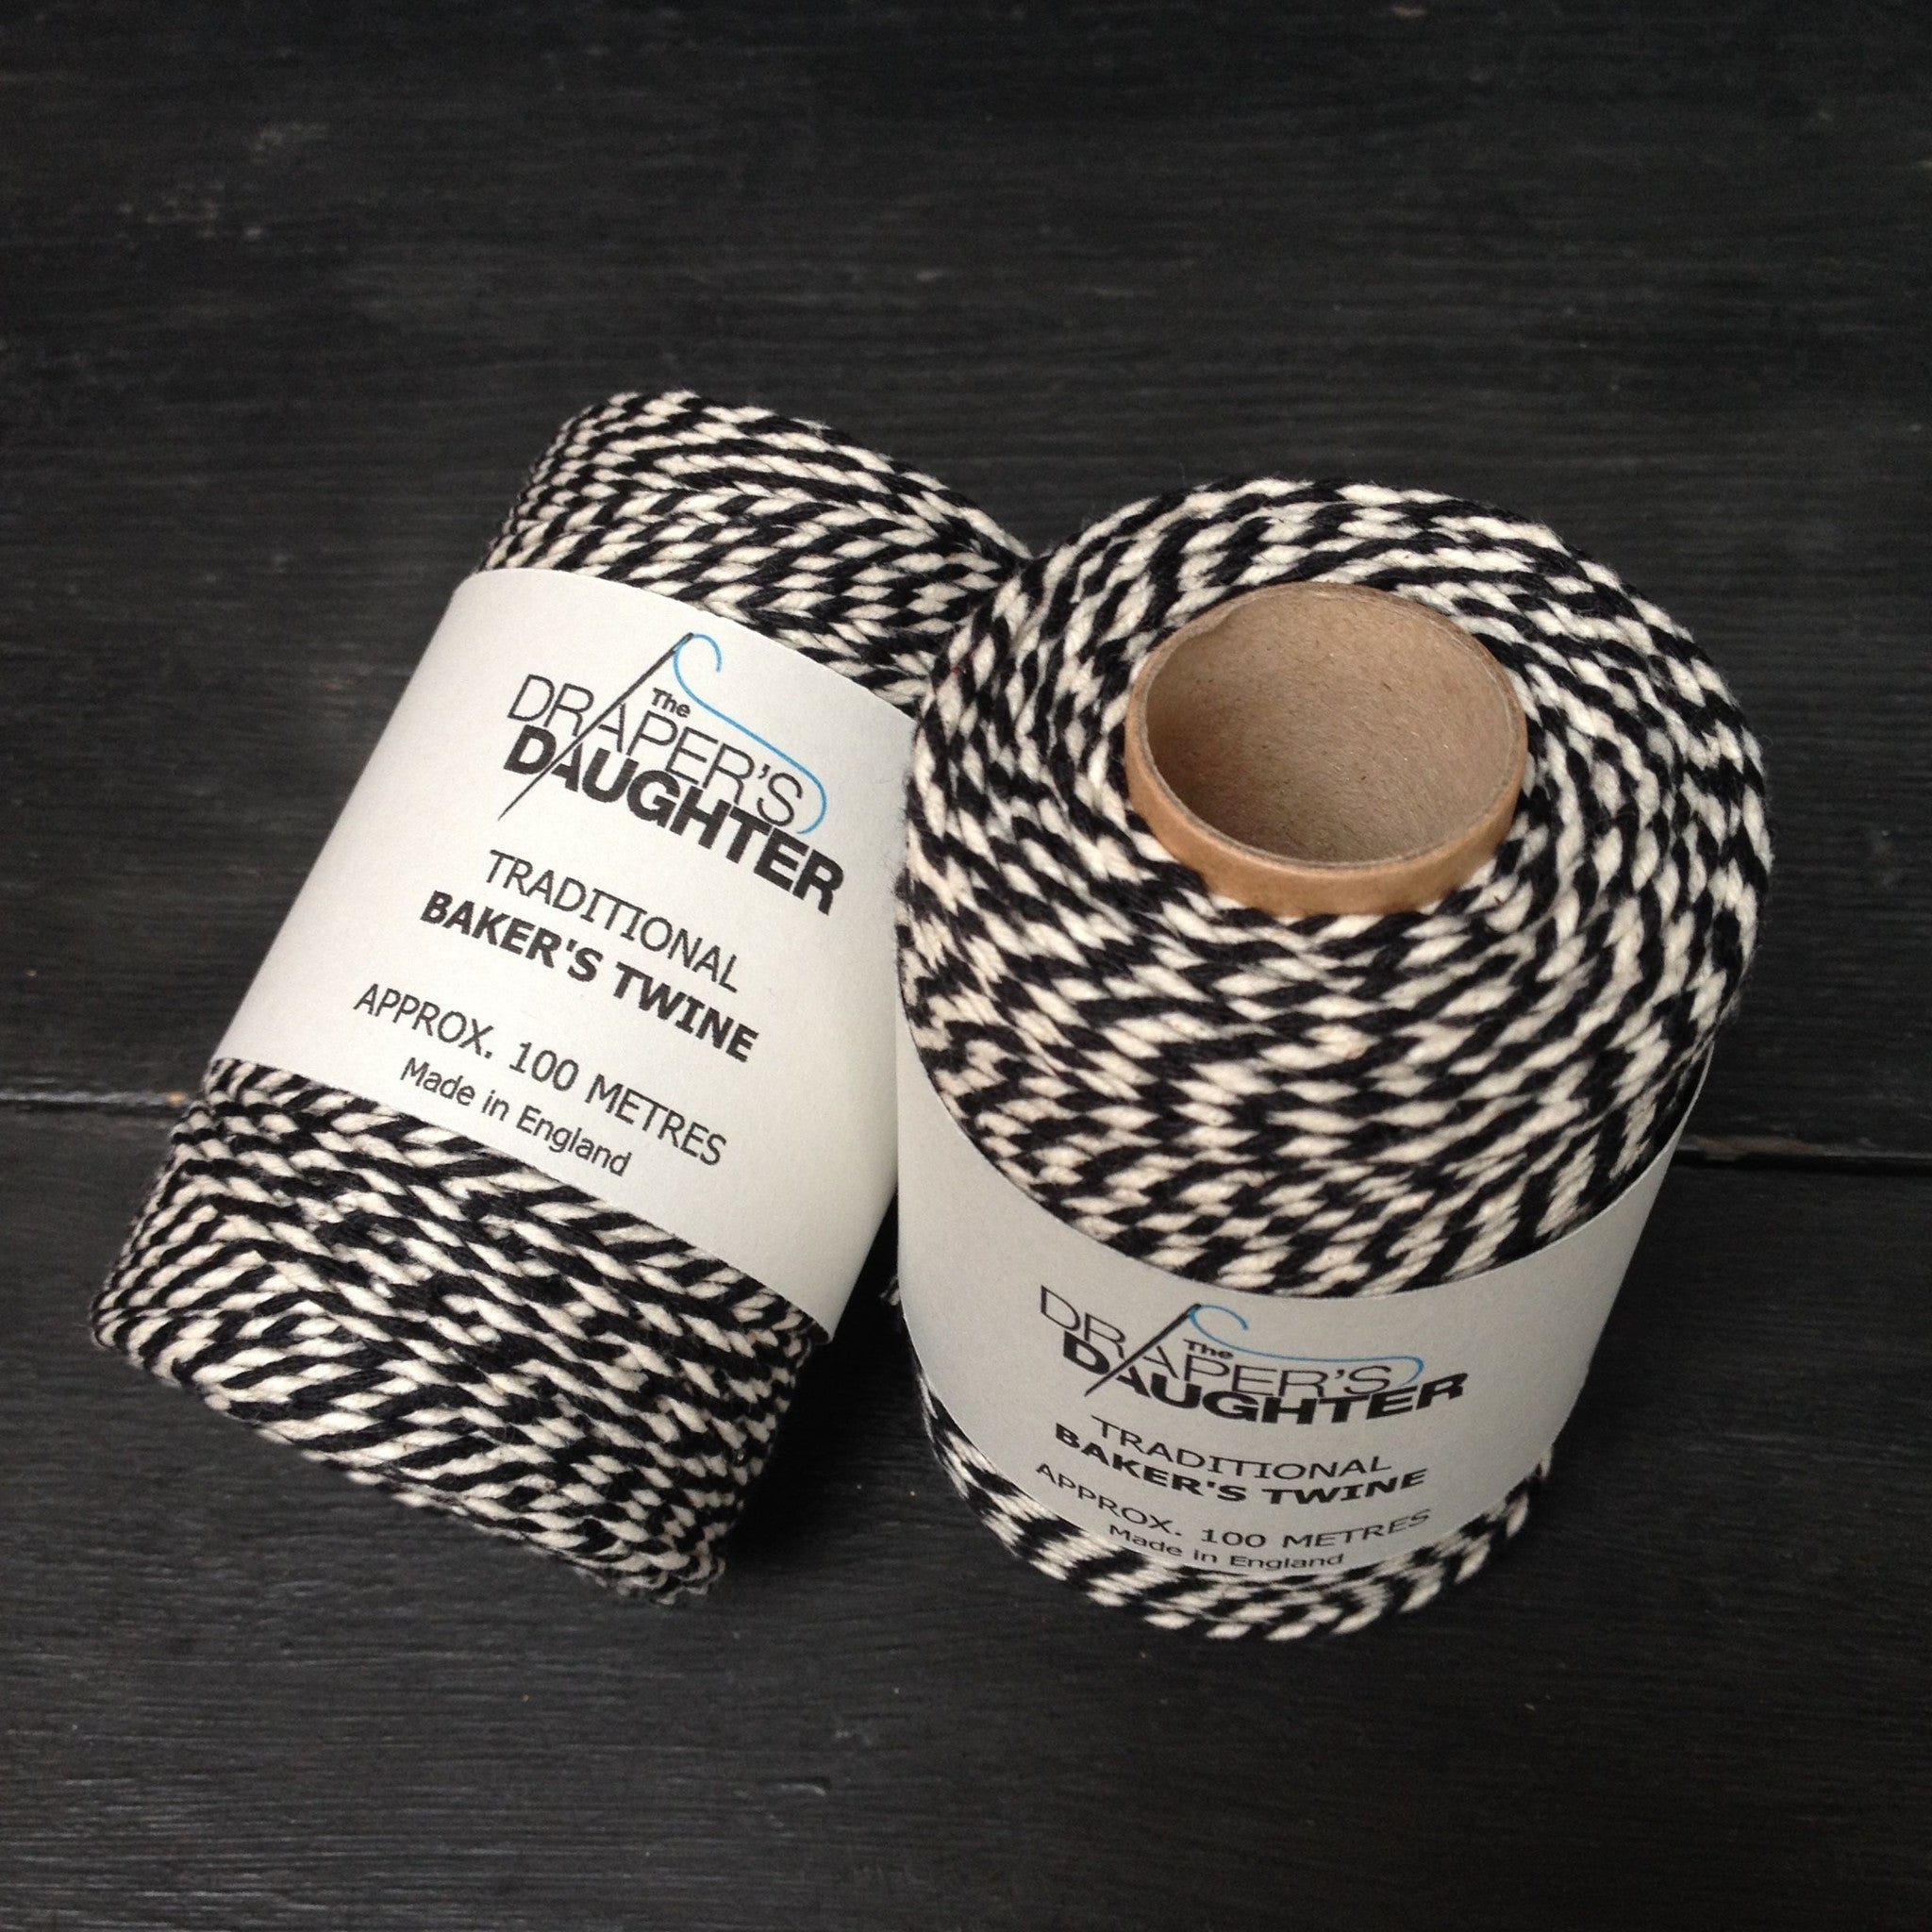 The Draper's Daughter Traditional Baker's Twine in Black